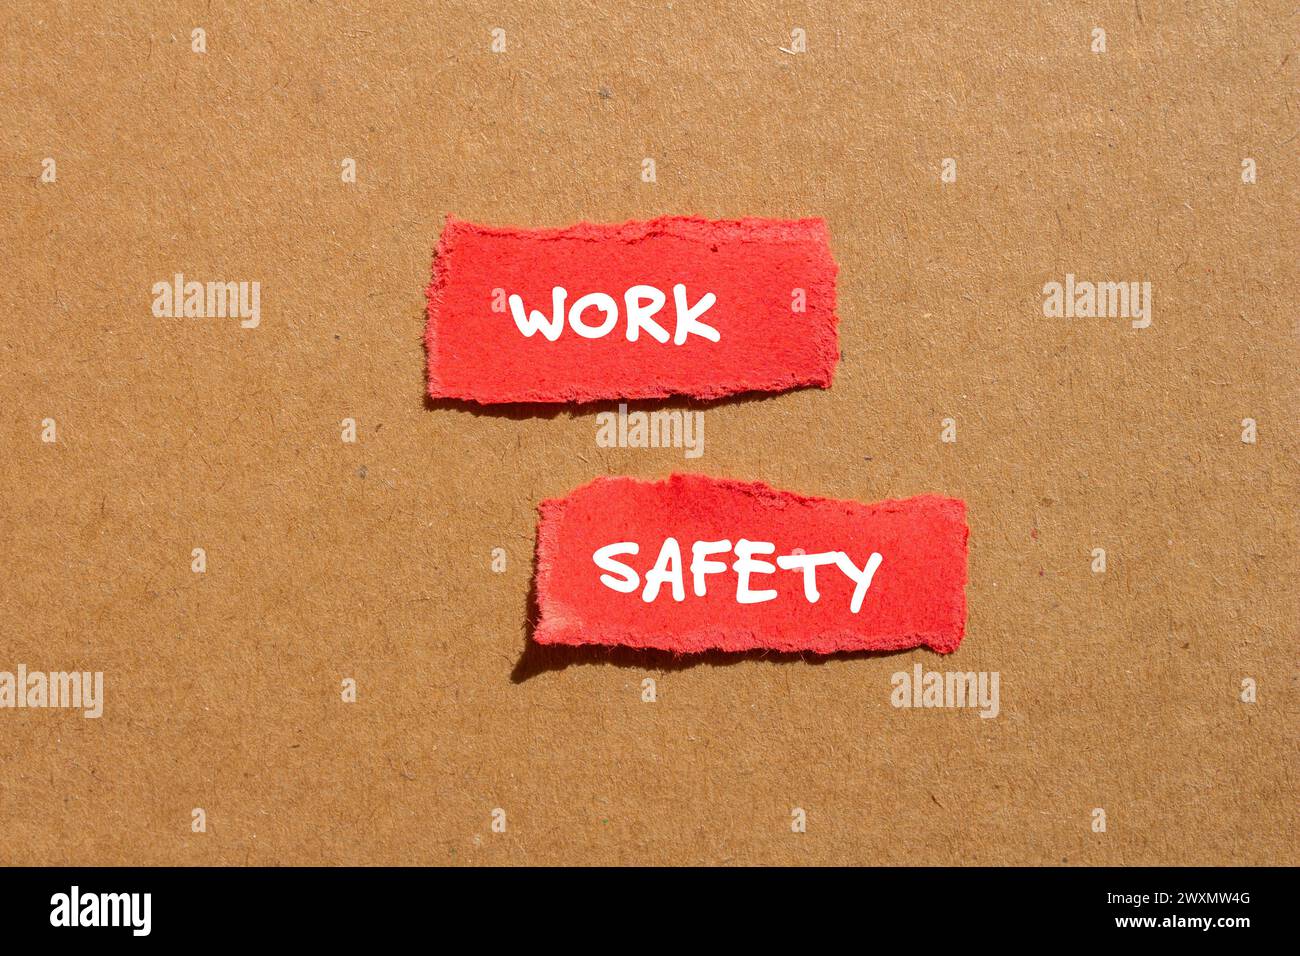 Work safety words written on red torn paper pieces with cardboard background. Conceptual business symbol. Copy space. Stock Photo